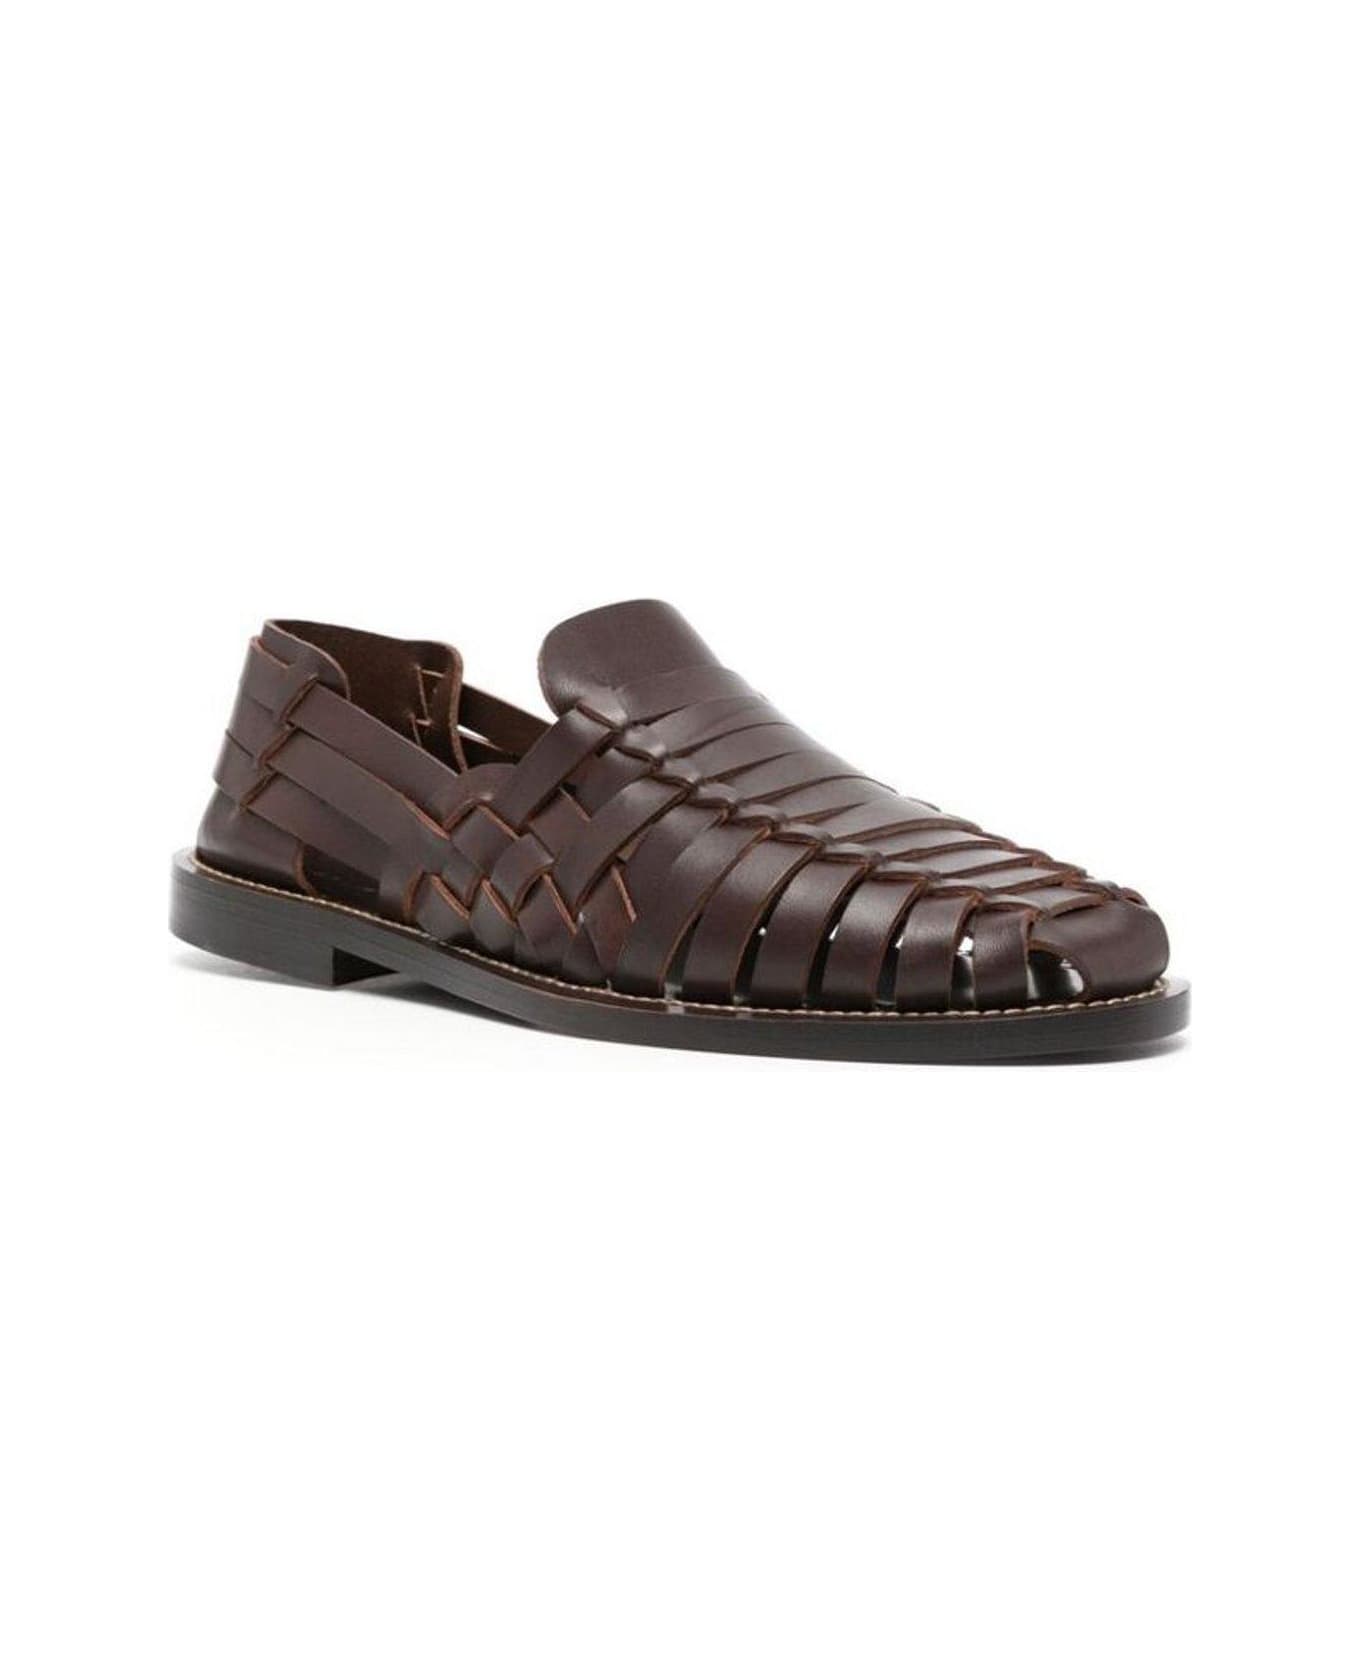 Tagliatore Miguel Slip-on Loafers - BROWN